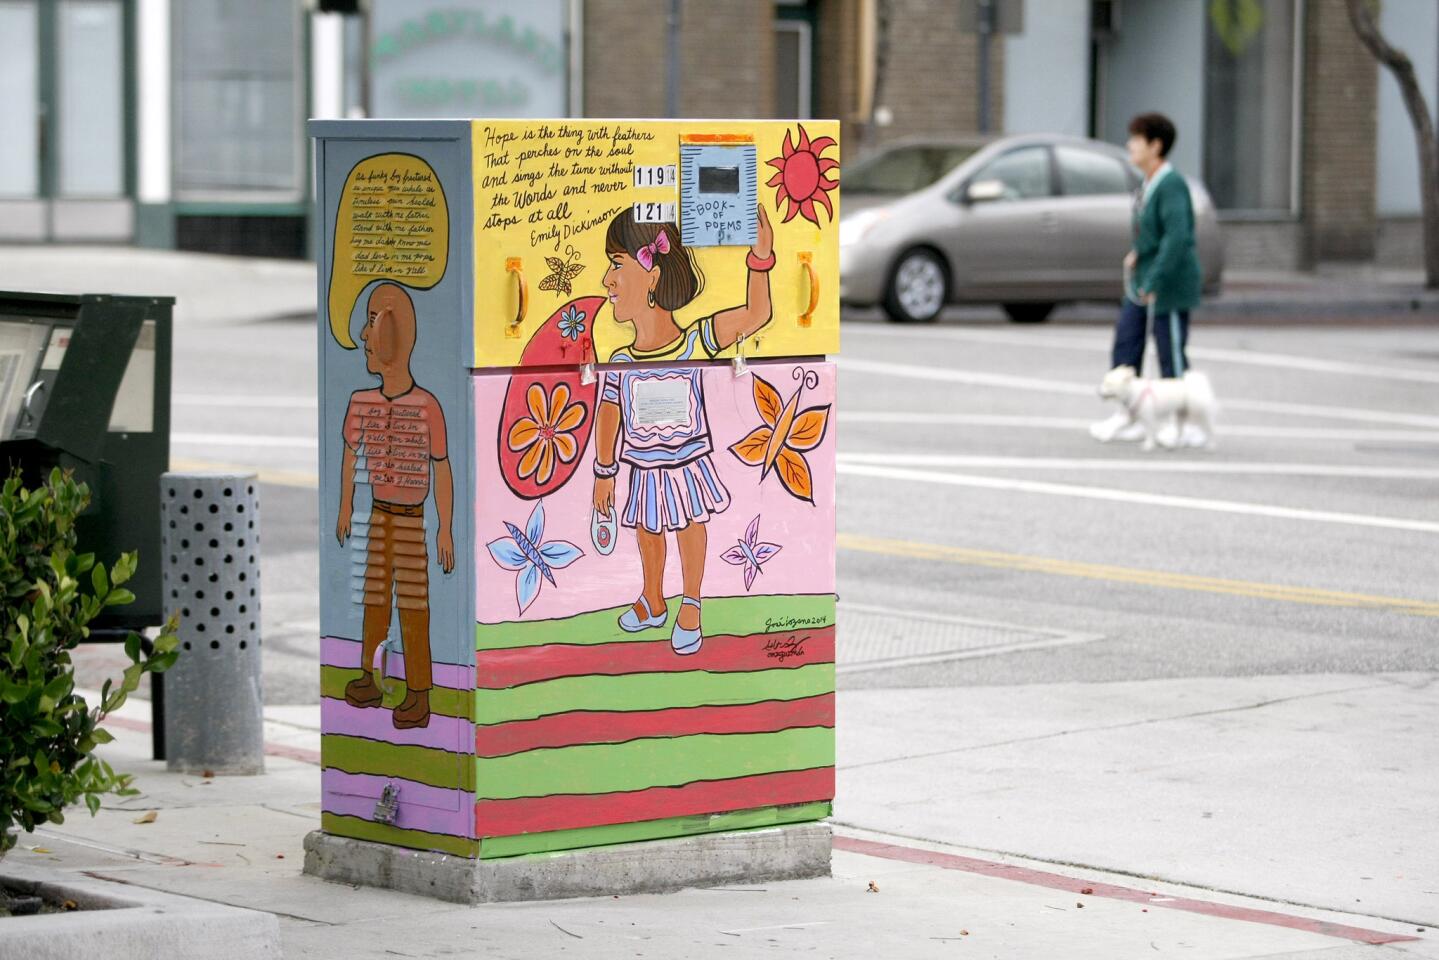 Photo Gallery: Utility box murals pop up in Glendale